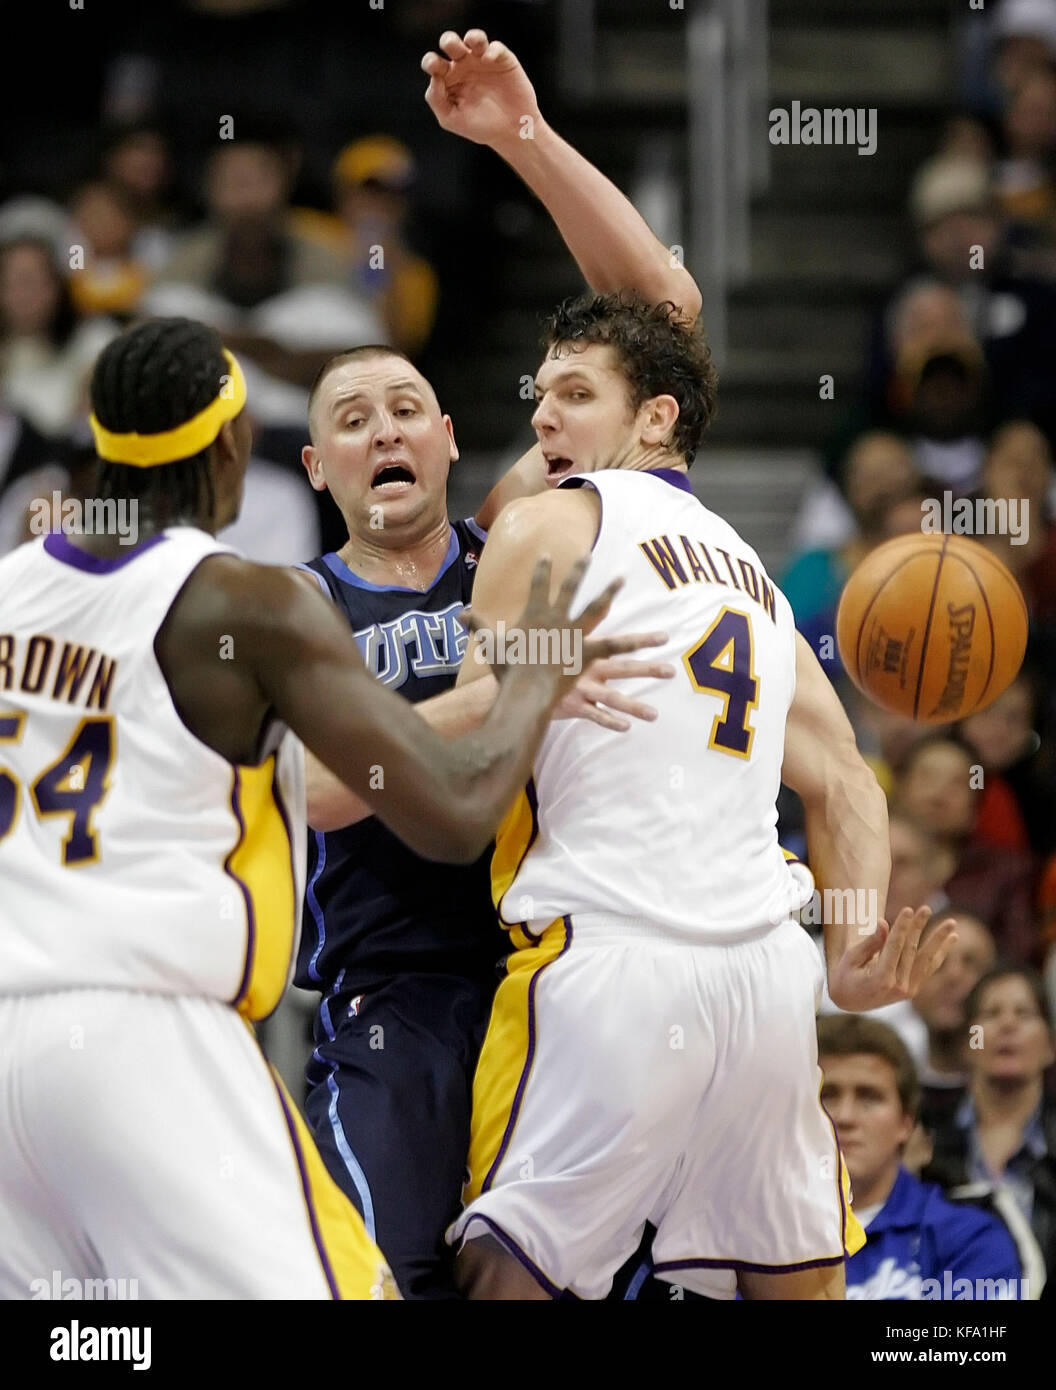 Los Angeles Lakers' Luke Walton, right, throws a behind the back pass to teammate Kwame Brown, left, as Utah Jazz's Greg Ostertag, center, defends in the first half in Los Angeles on Sunday, Jan. 1, 2006. Photo by Francis Specker Stock Photo